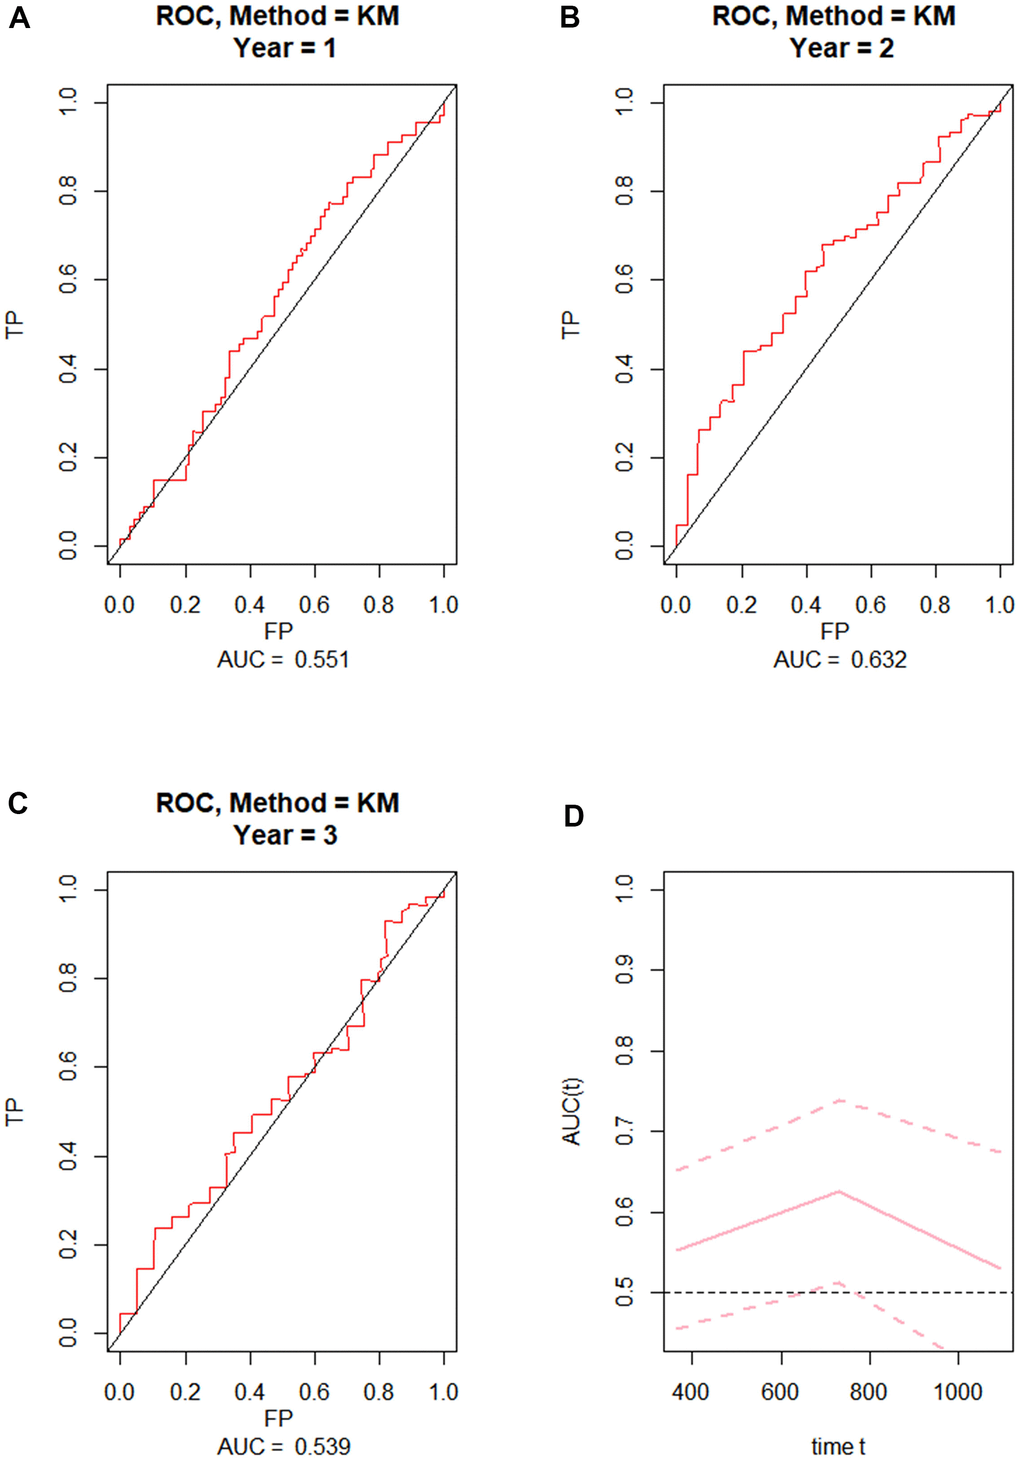 External validation of the prognostic nomogram. (A–C) ROC curves for predicting 1-year, 2-year, and 3-year OS in the CGGA dataset. (D) Time-dependent ROC-AUC with 95% confidence interval for 1-year, 2-year, and 3-year OS in the CGGA dataset. X-axis time unit is day.